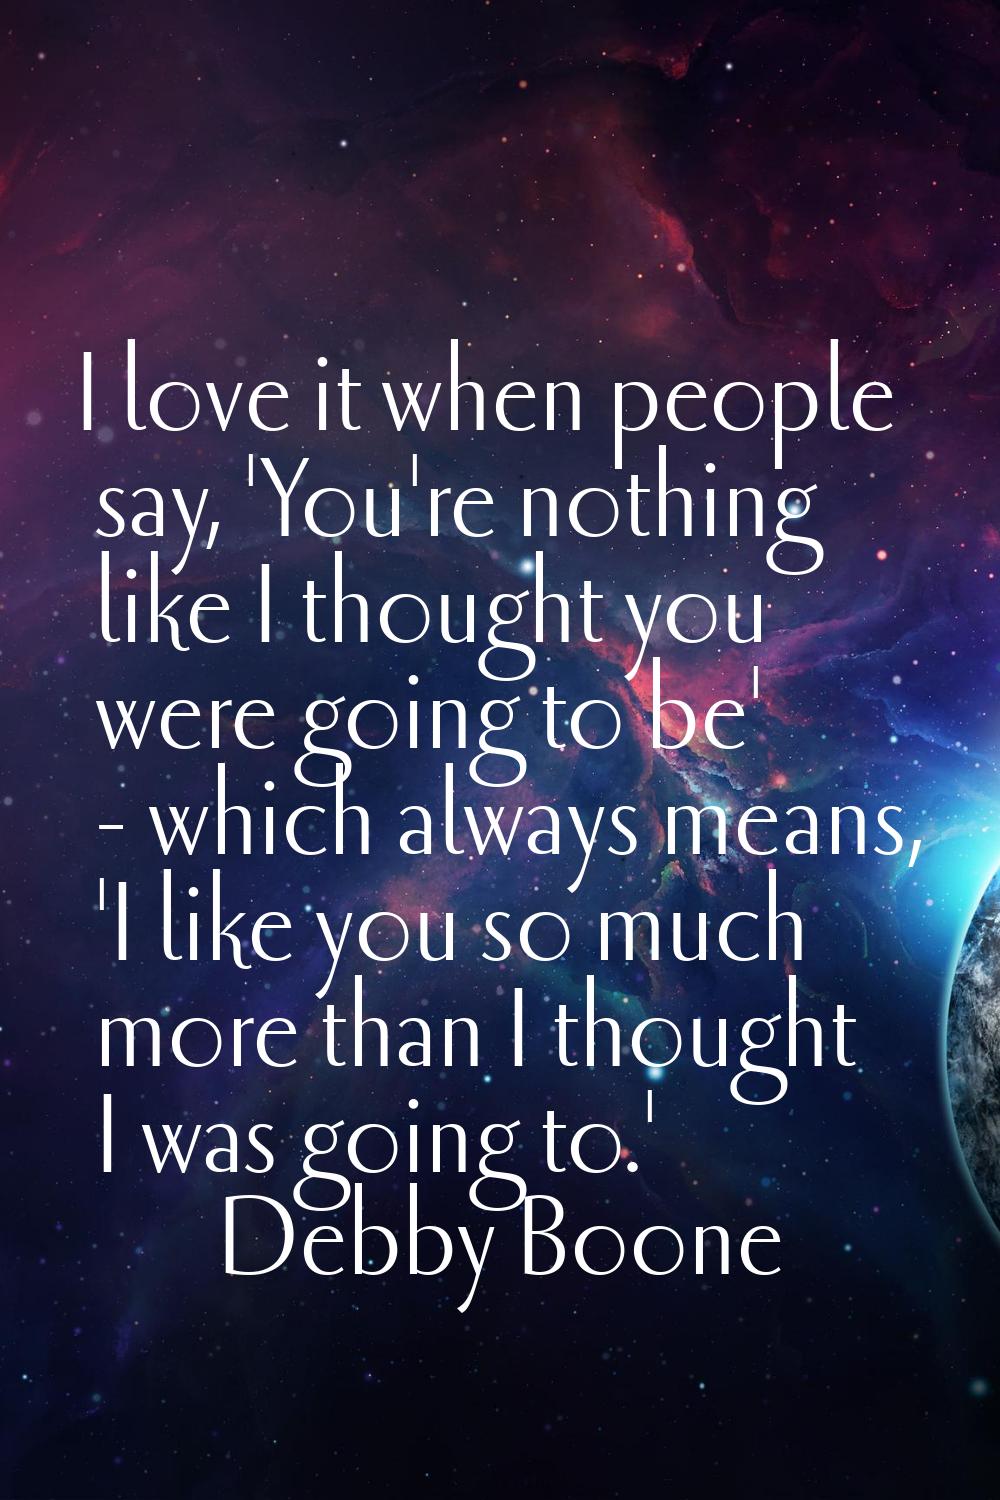 I love it when people say, 'You're nothing like I thought you were going to be' - which always mean